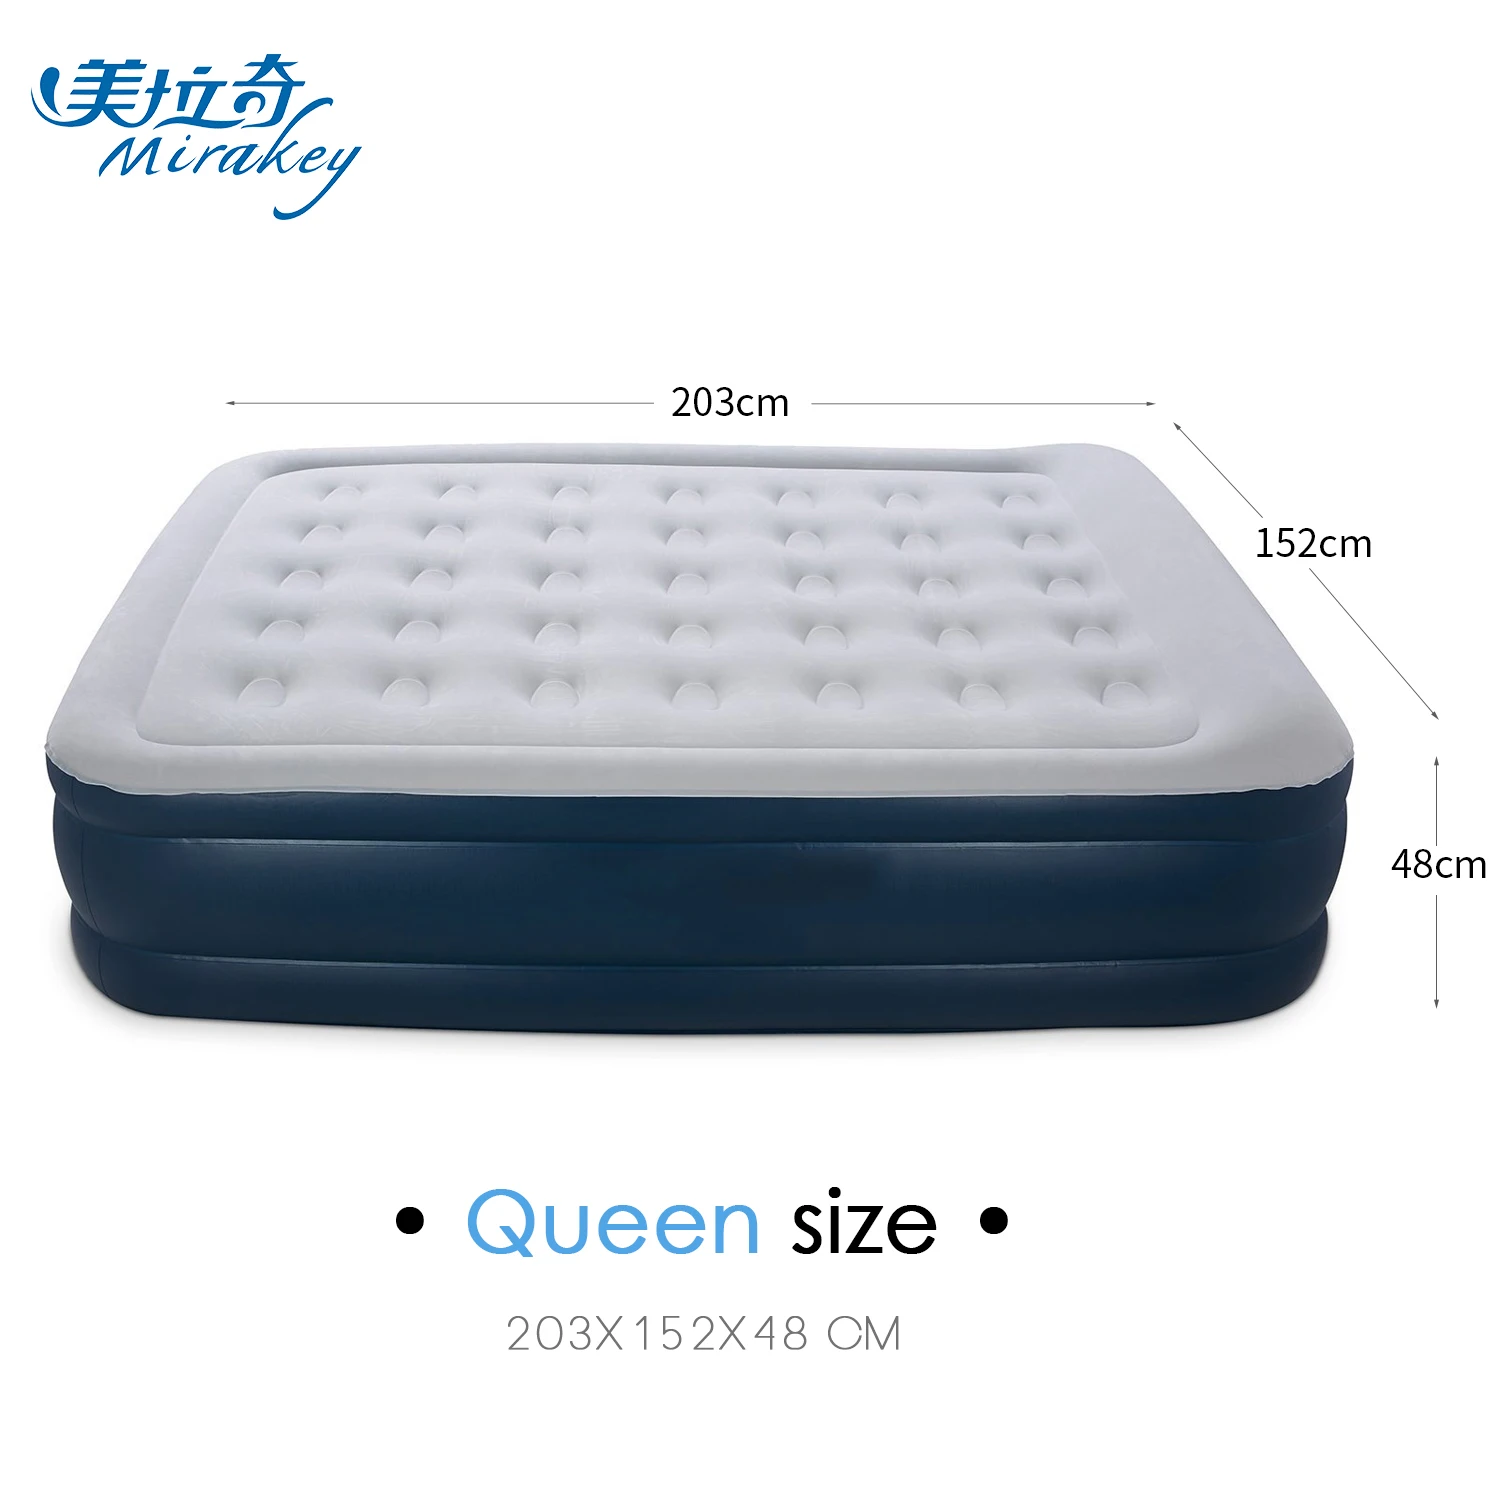 Mirakey airbed Raised queen size custom air bed custom inflatable mattress with electric pump with bulit-in pillow